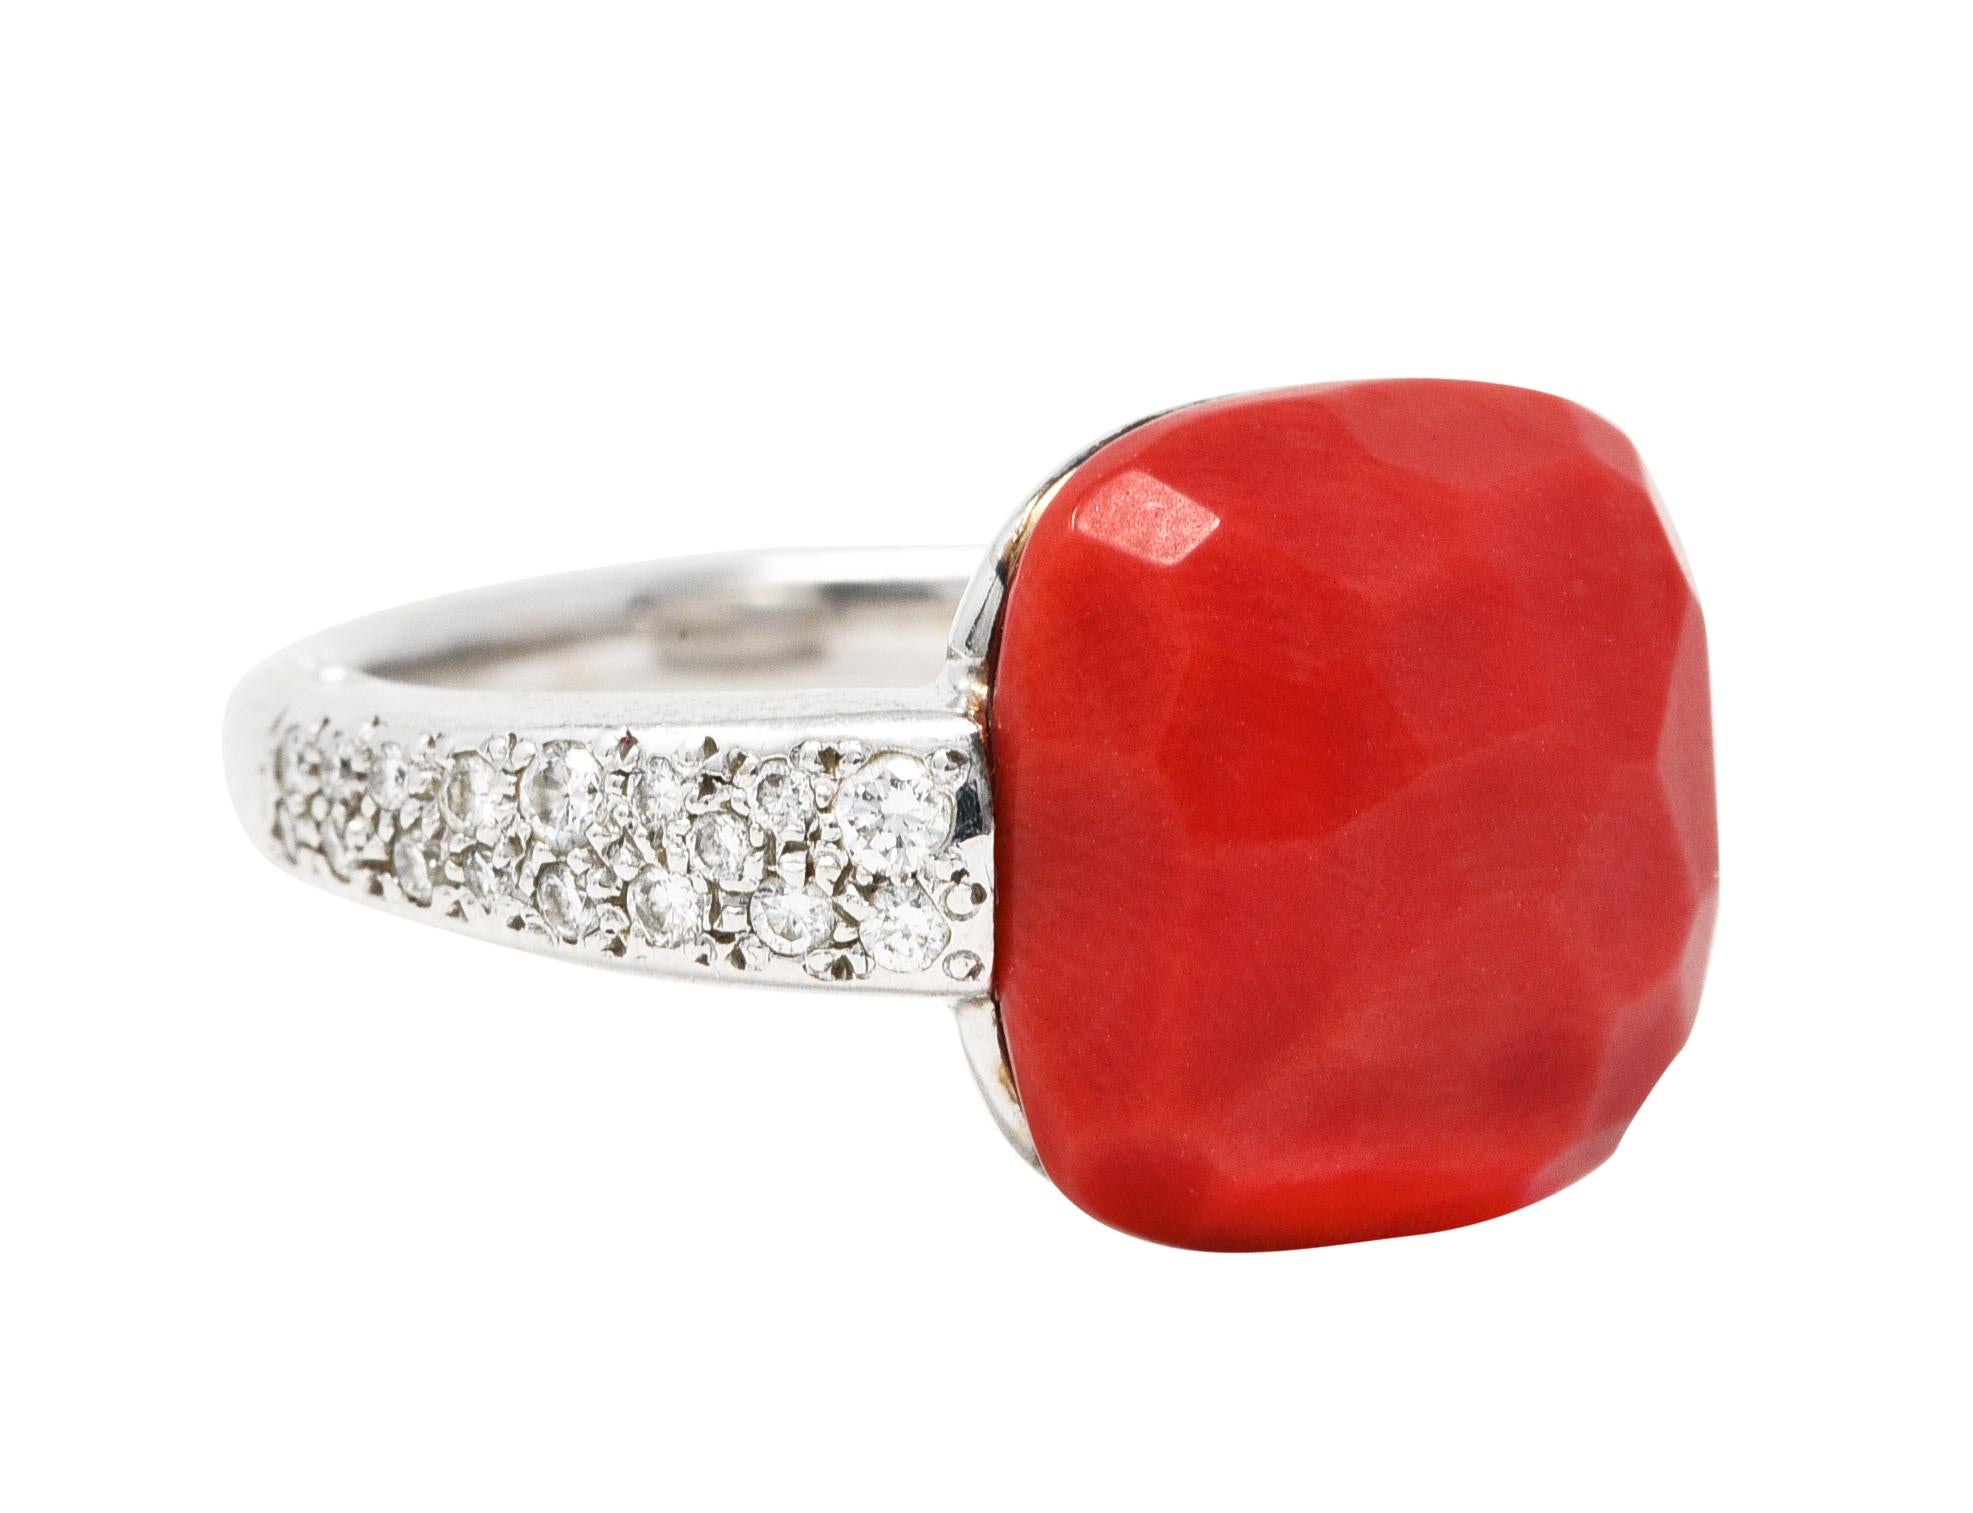 Featuring a cushion cut cabochon of coral measuring approximately 12.7 x 12.7 mm

Opaque pastel orangey red in color with a faceted finish and very good polish

Flanked by pavè diamond shoulders

Round brilliant cut diamonds weigh in total